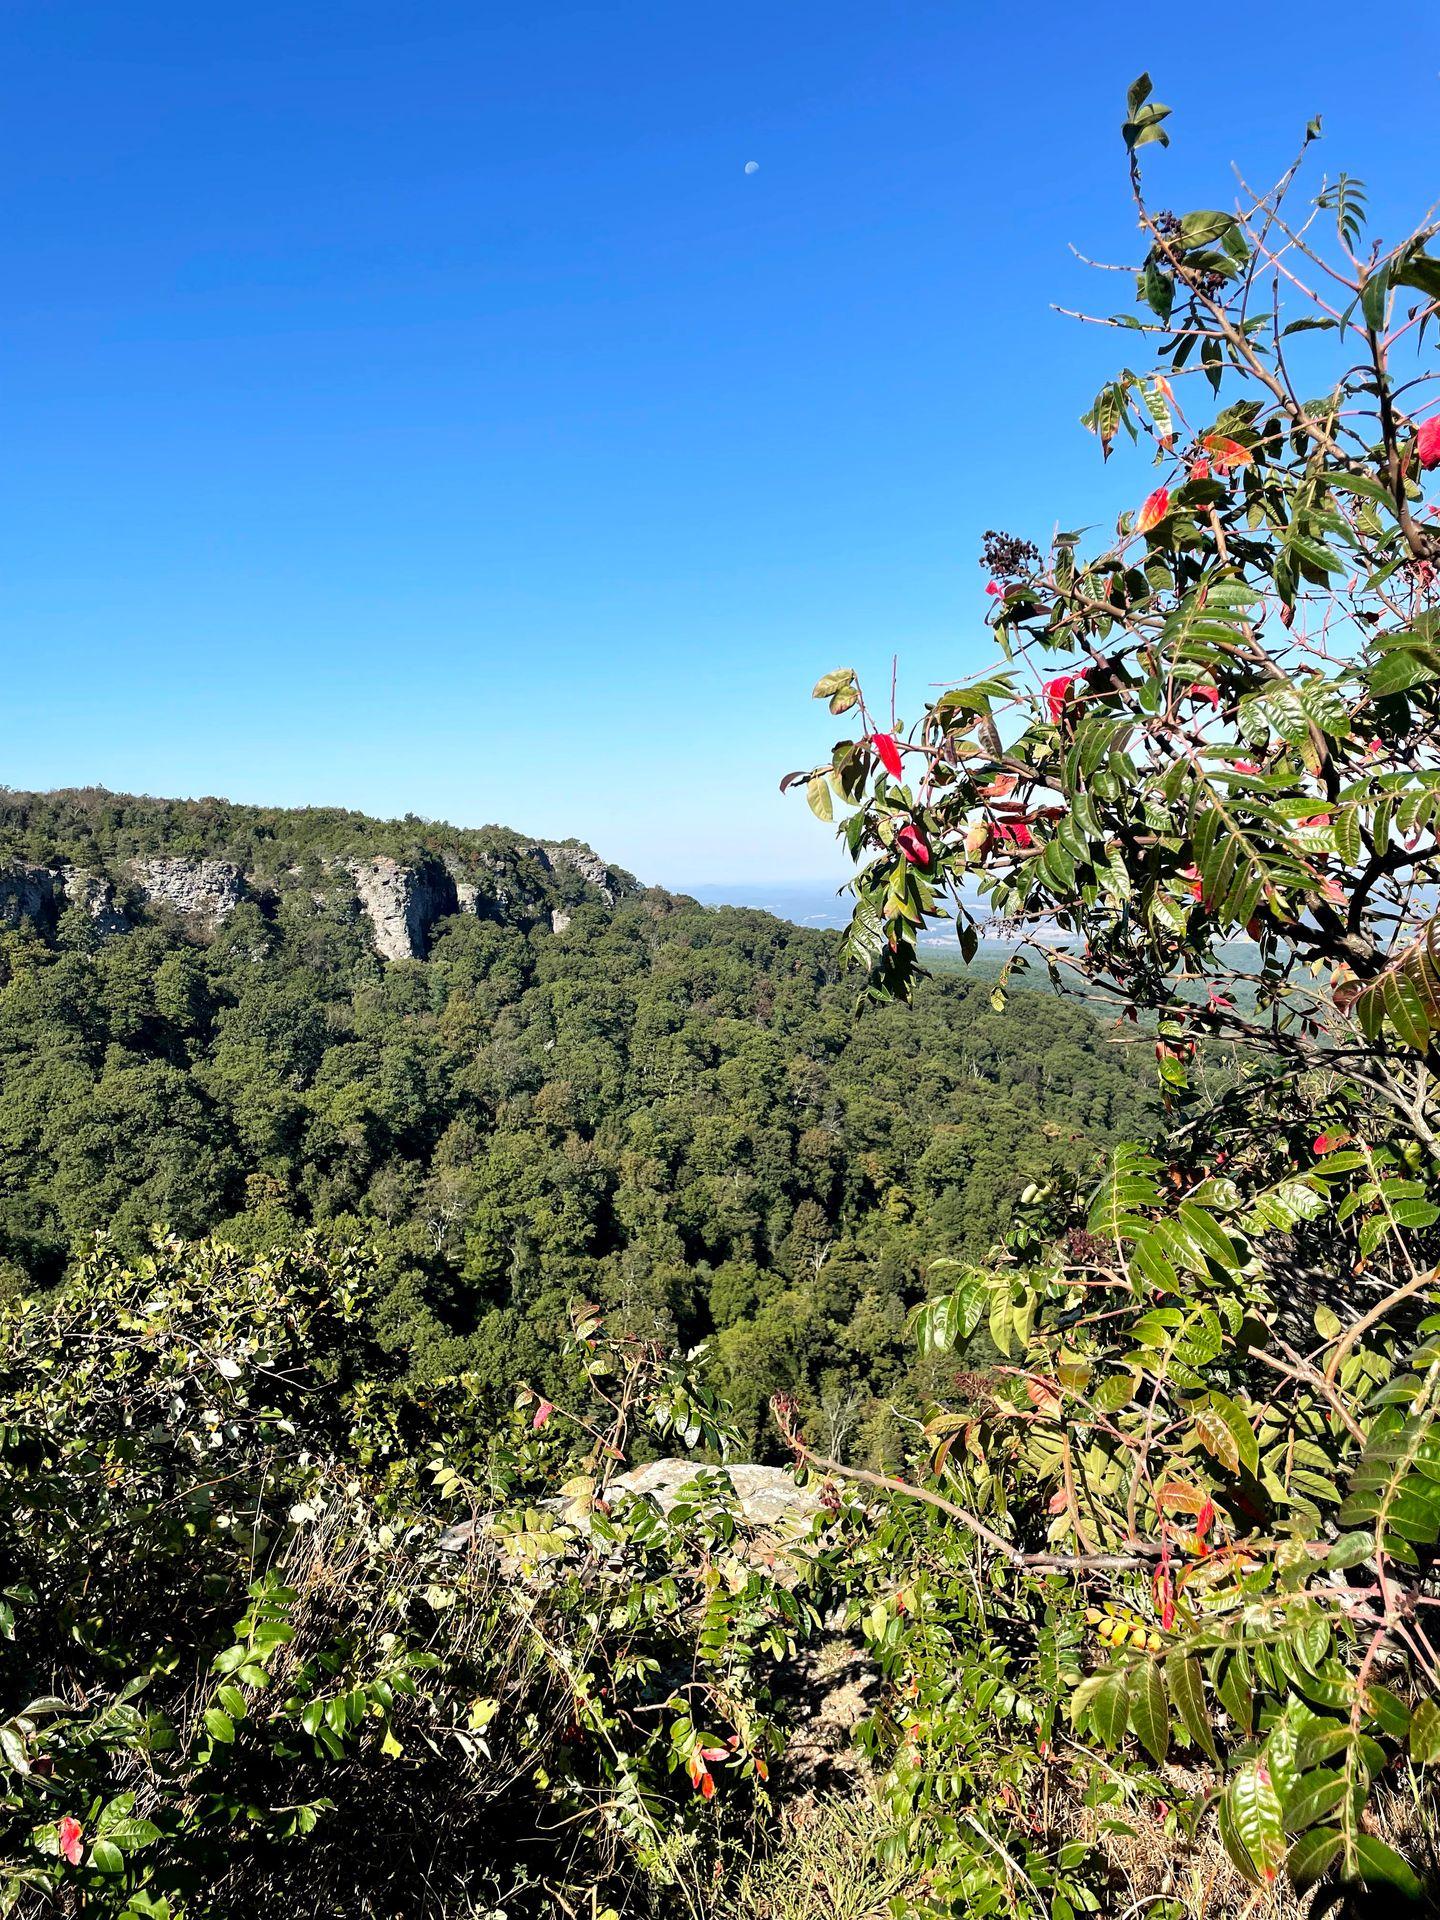 A view of greenery and cliffs from an overlook at Mount Magazine State Park.